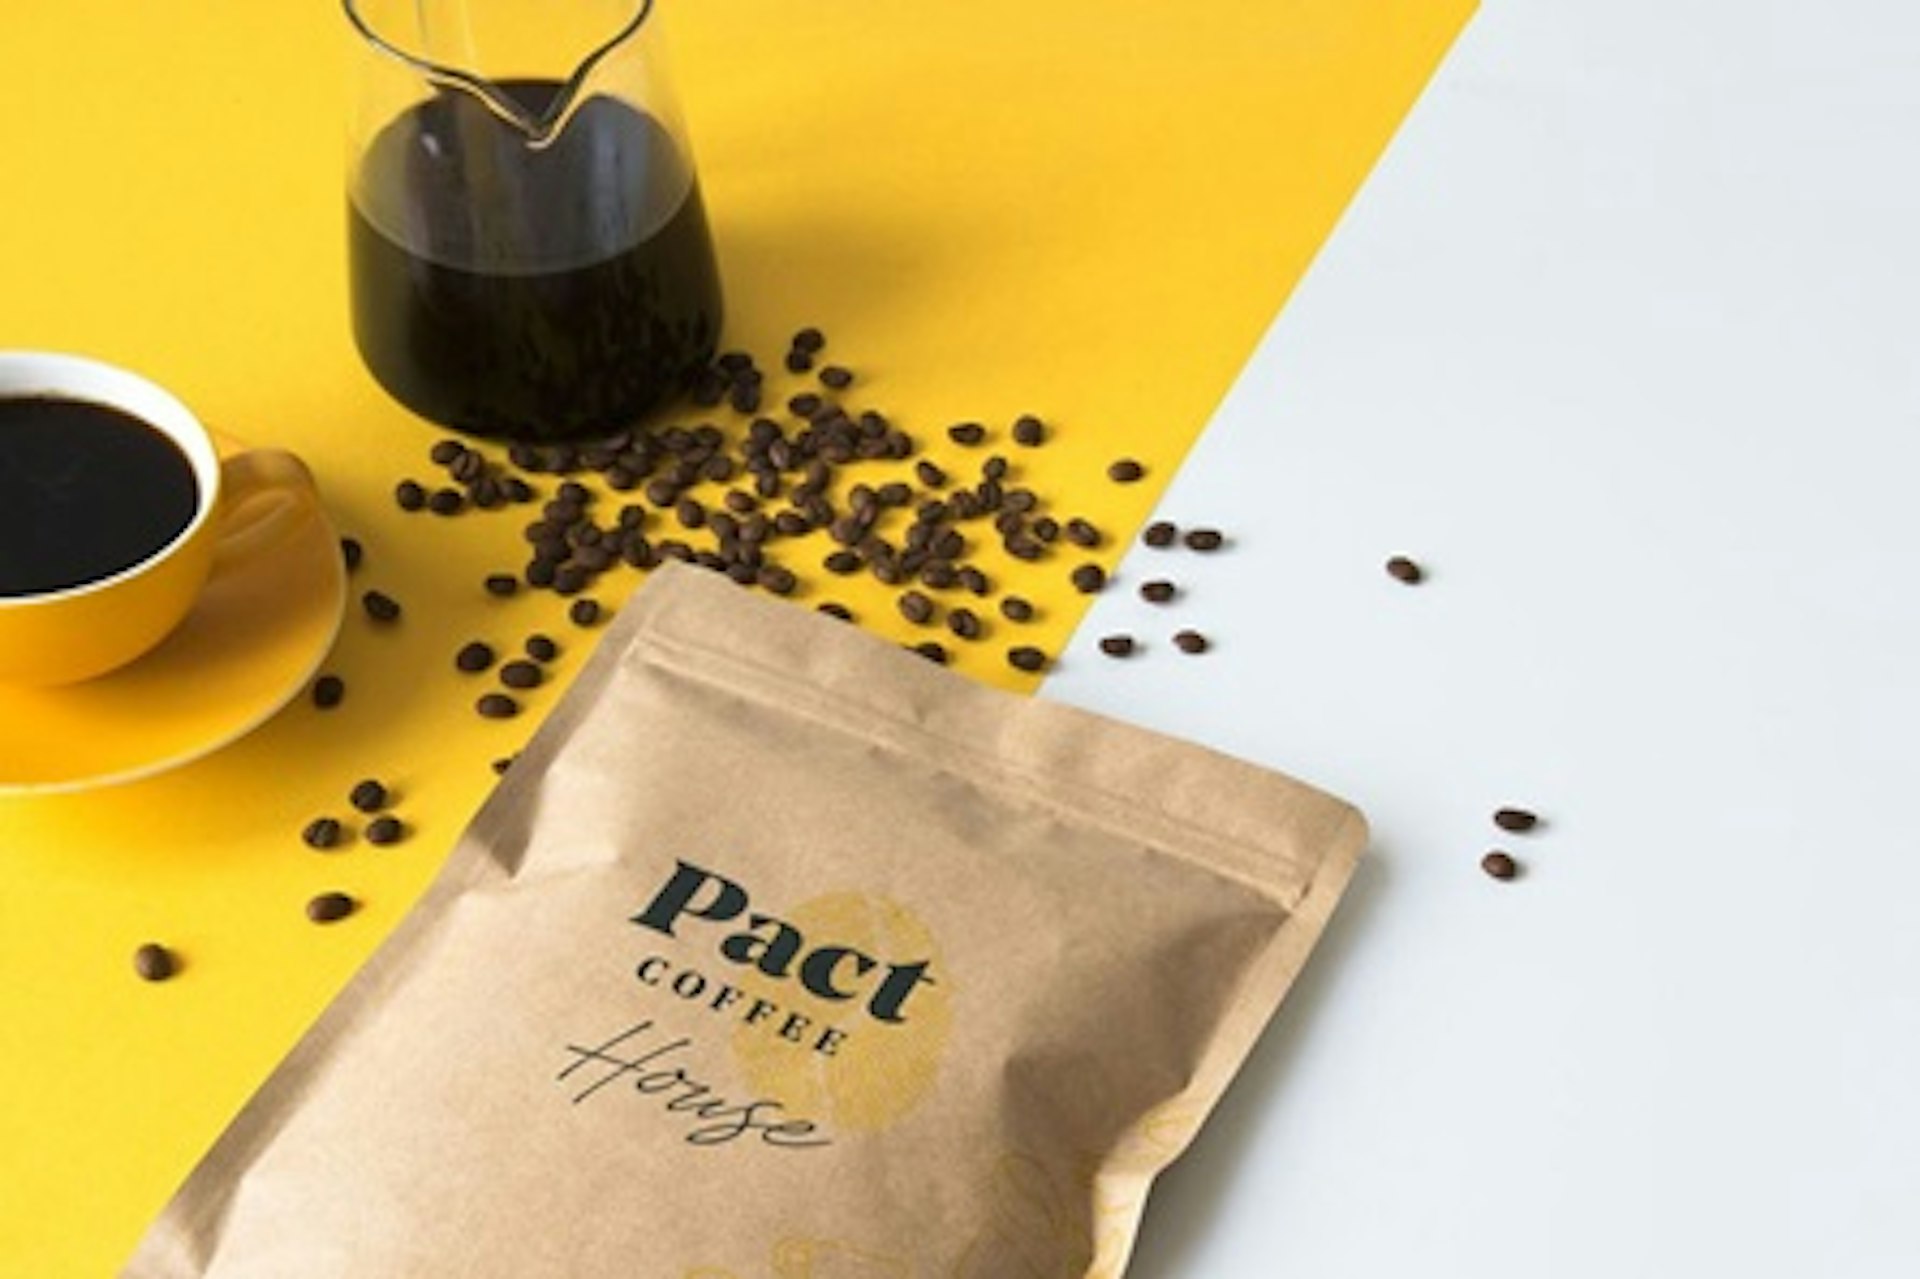 Six Month Subscription of Award Winning Pact Coffee 4